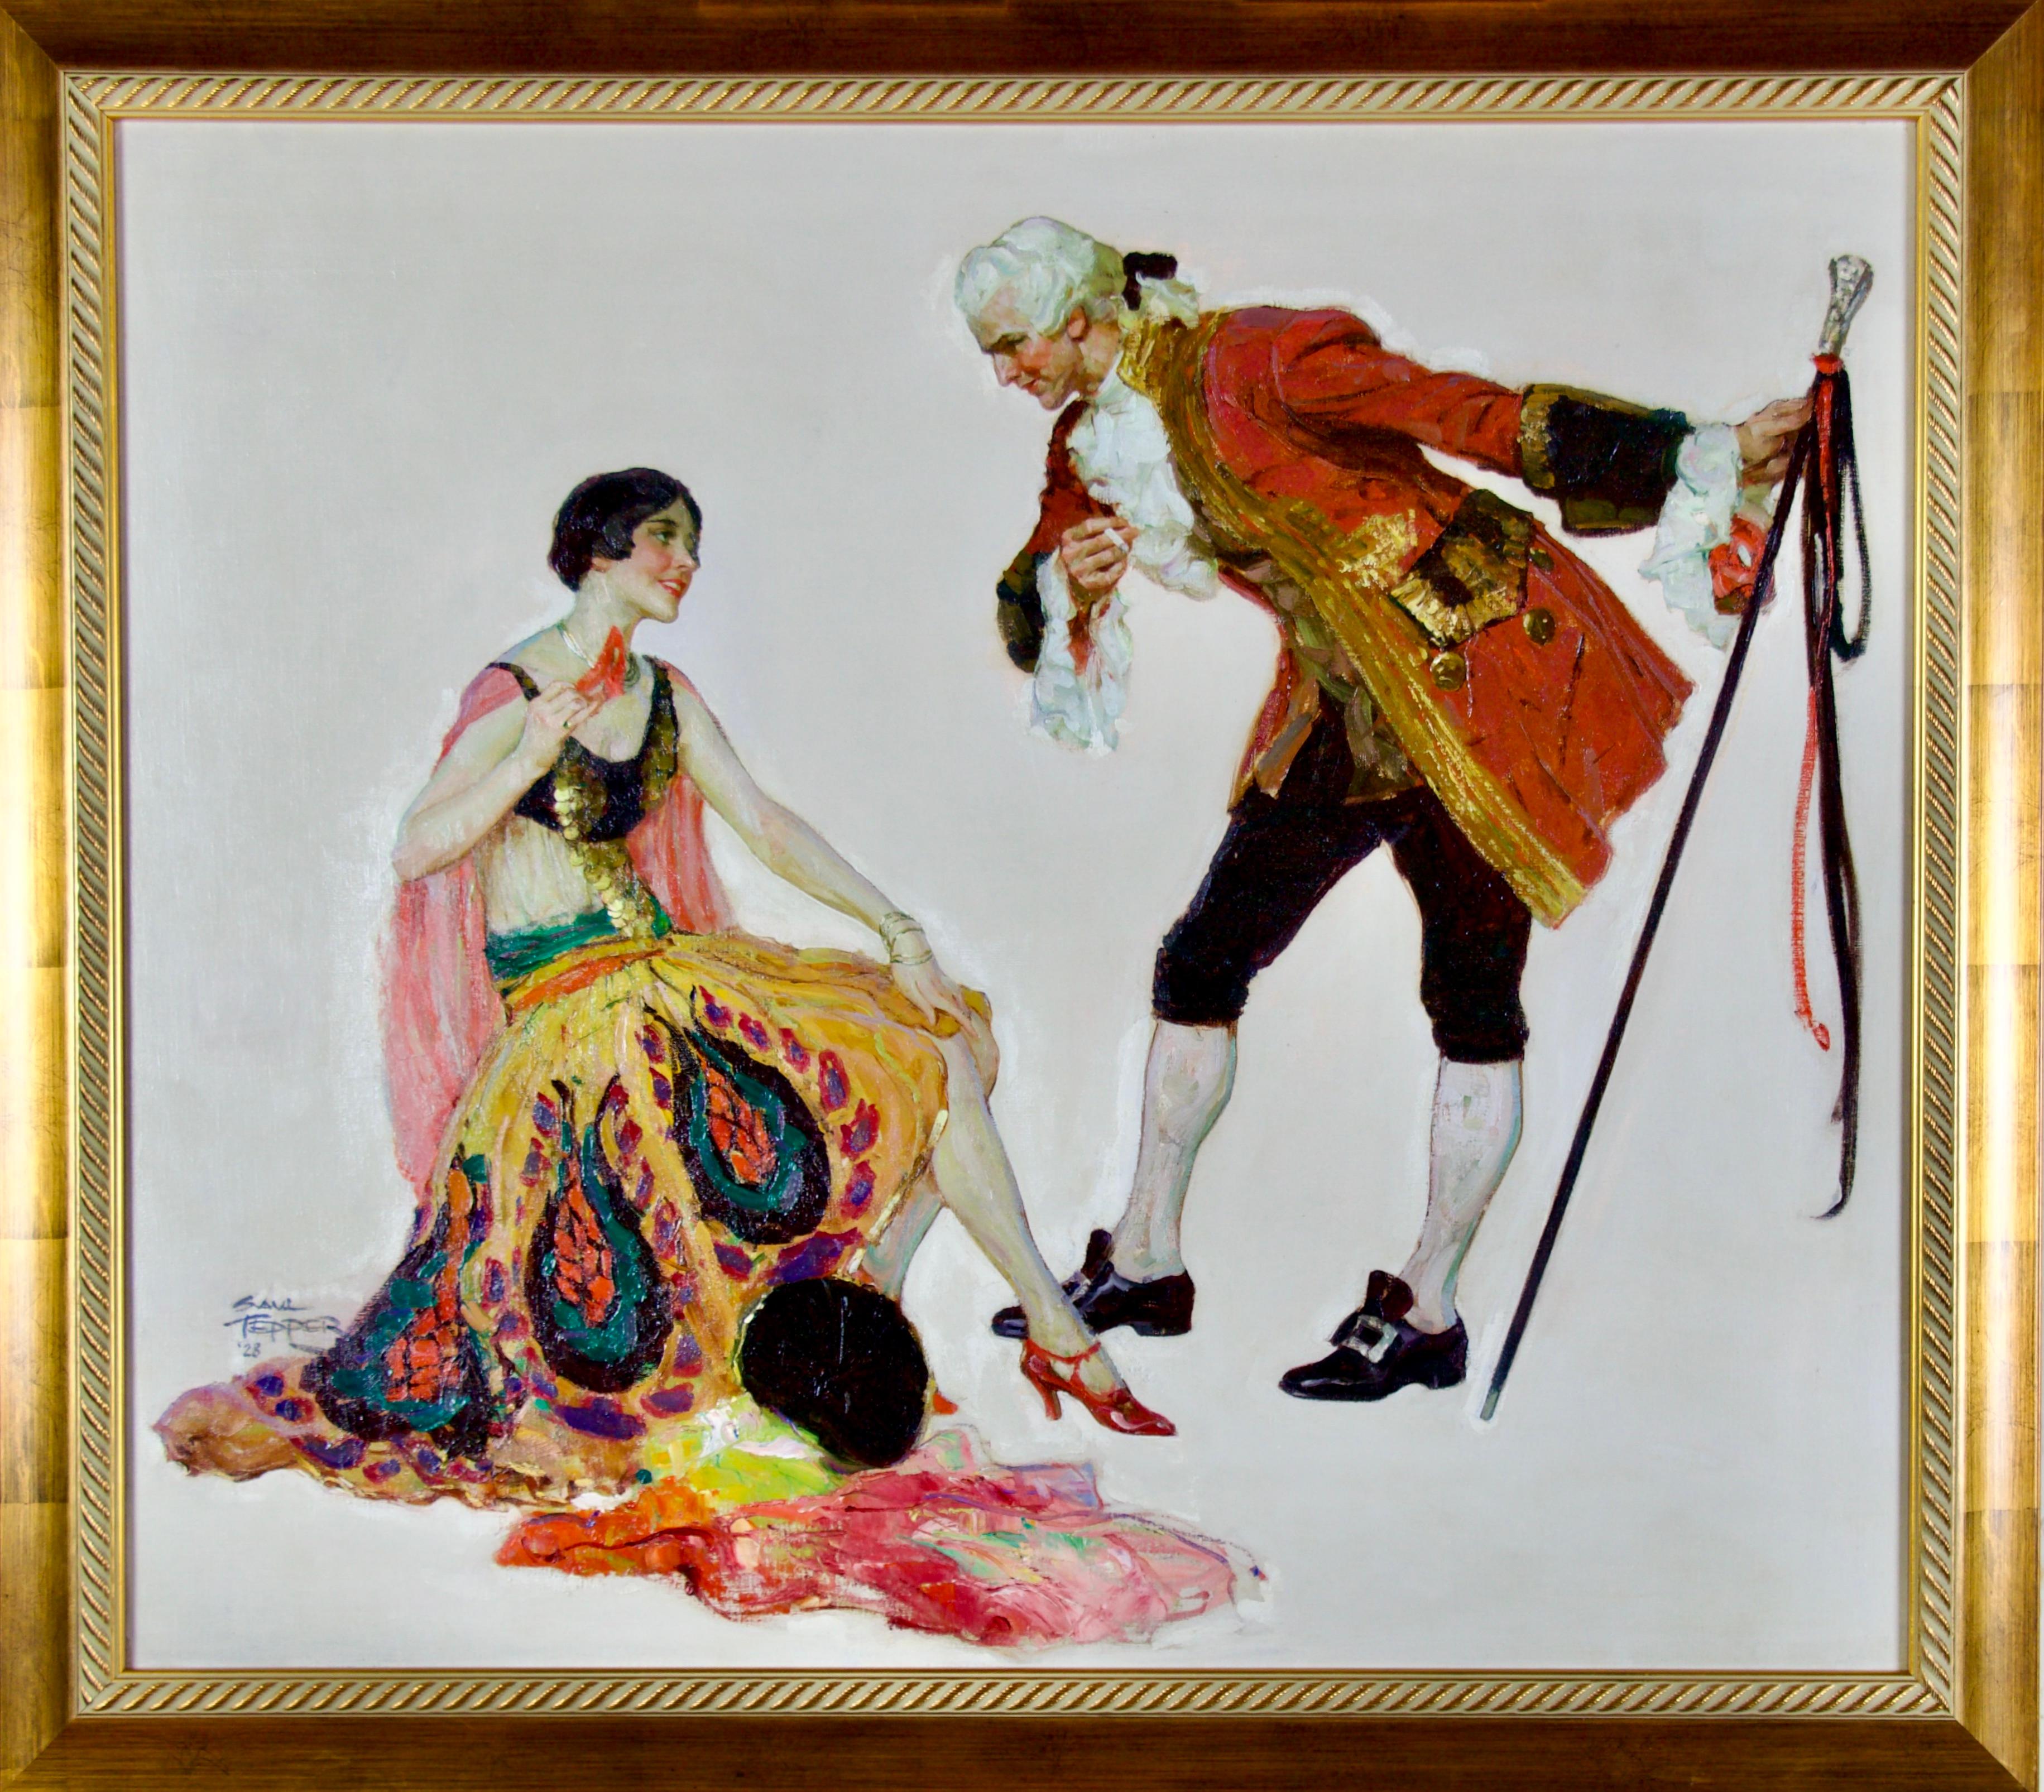 At the Masquerade, Chesterfield Cigarette advertisement - Painting by Saul Tepper